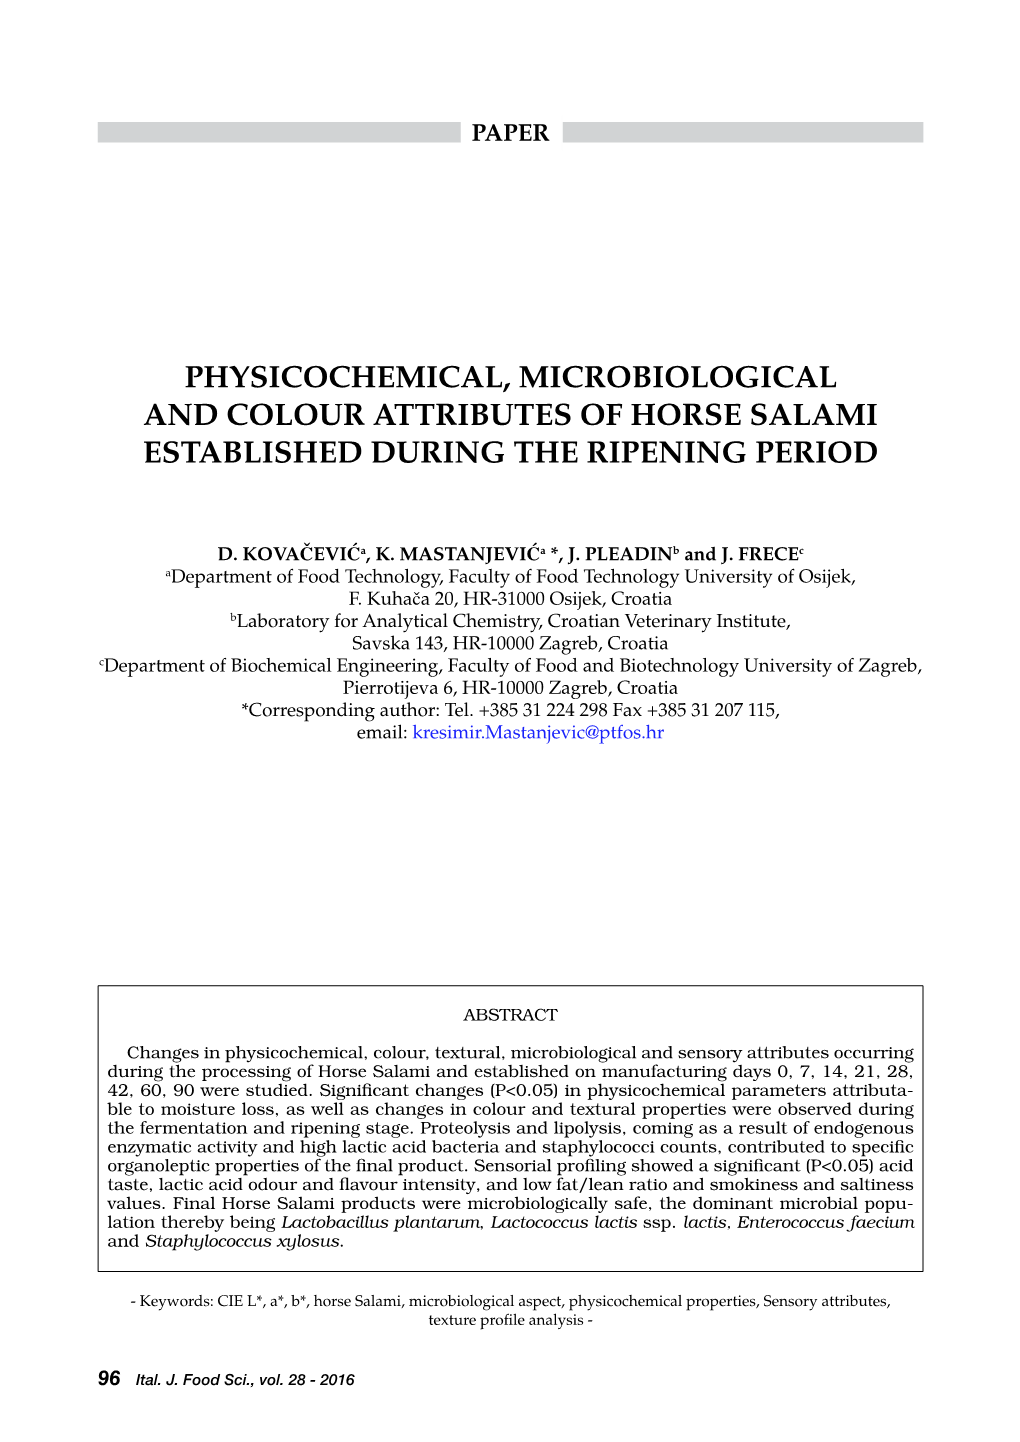 Physicochemical, Microbiological and Colour Attributes of Horse Salami Established During the Ripening Period